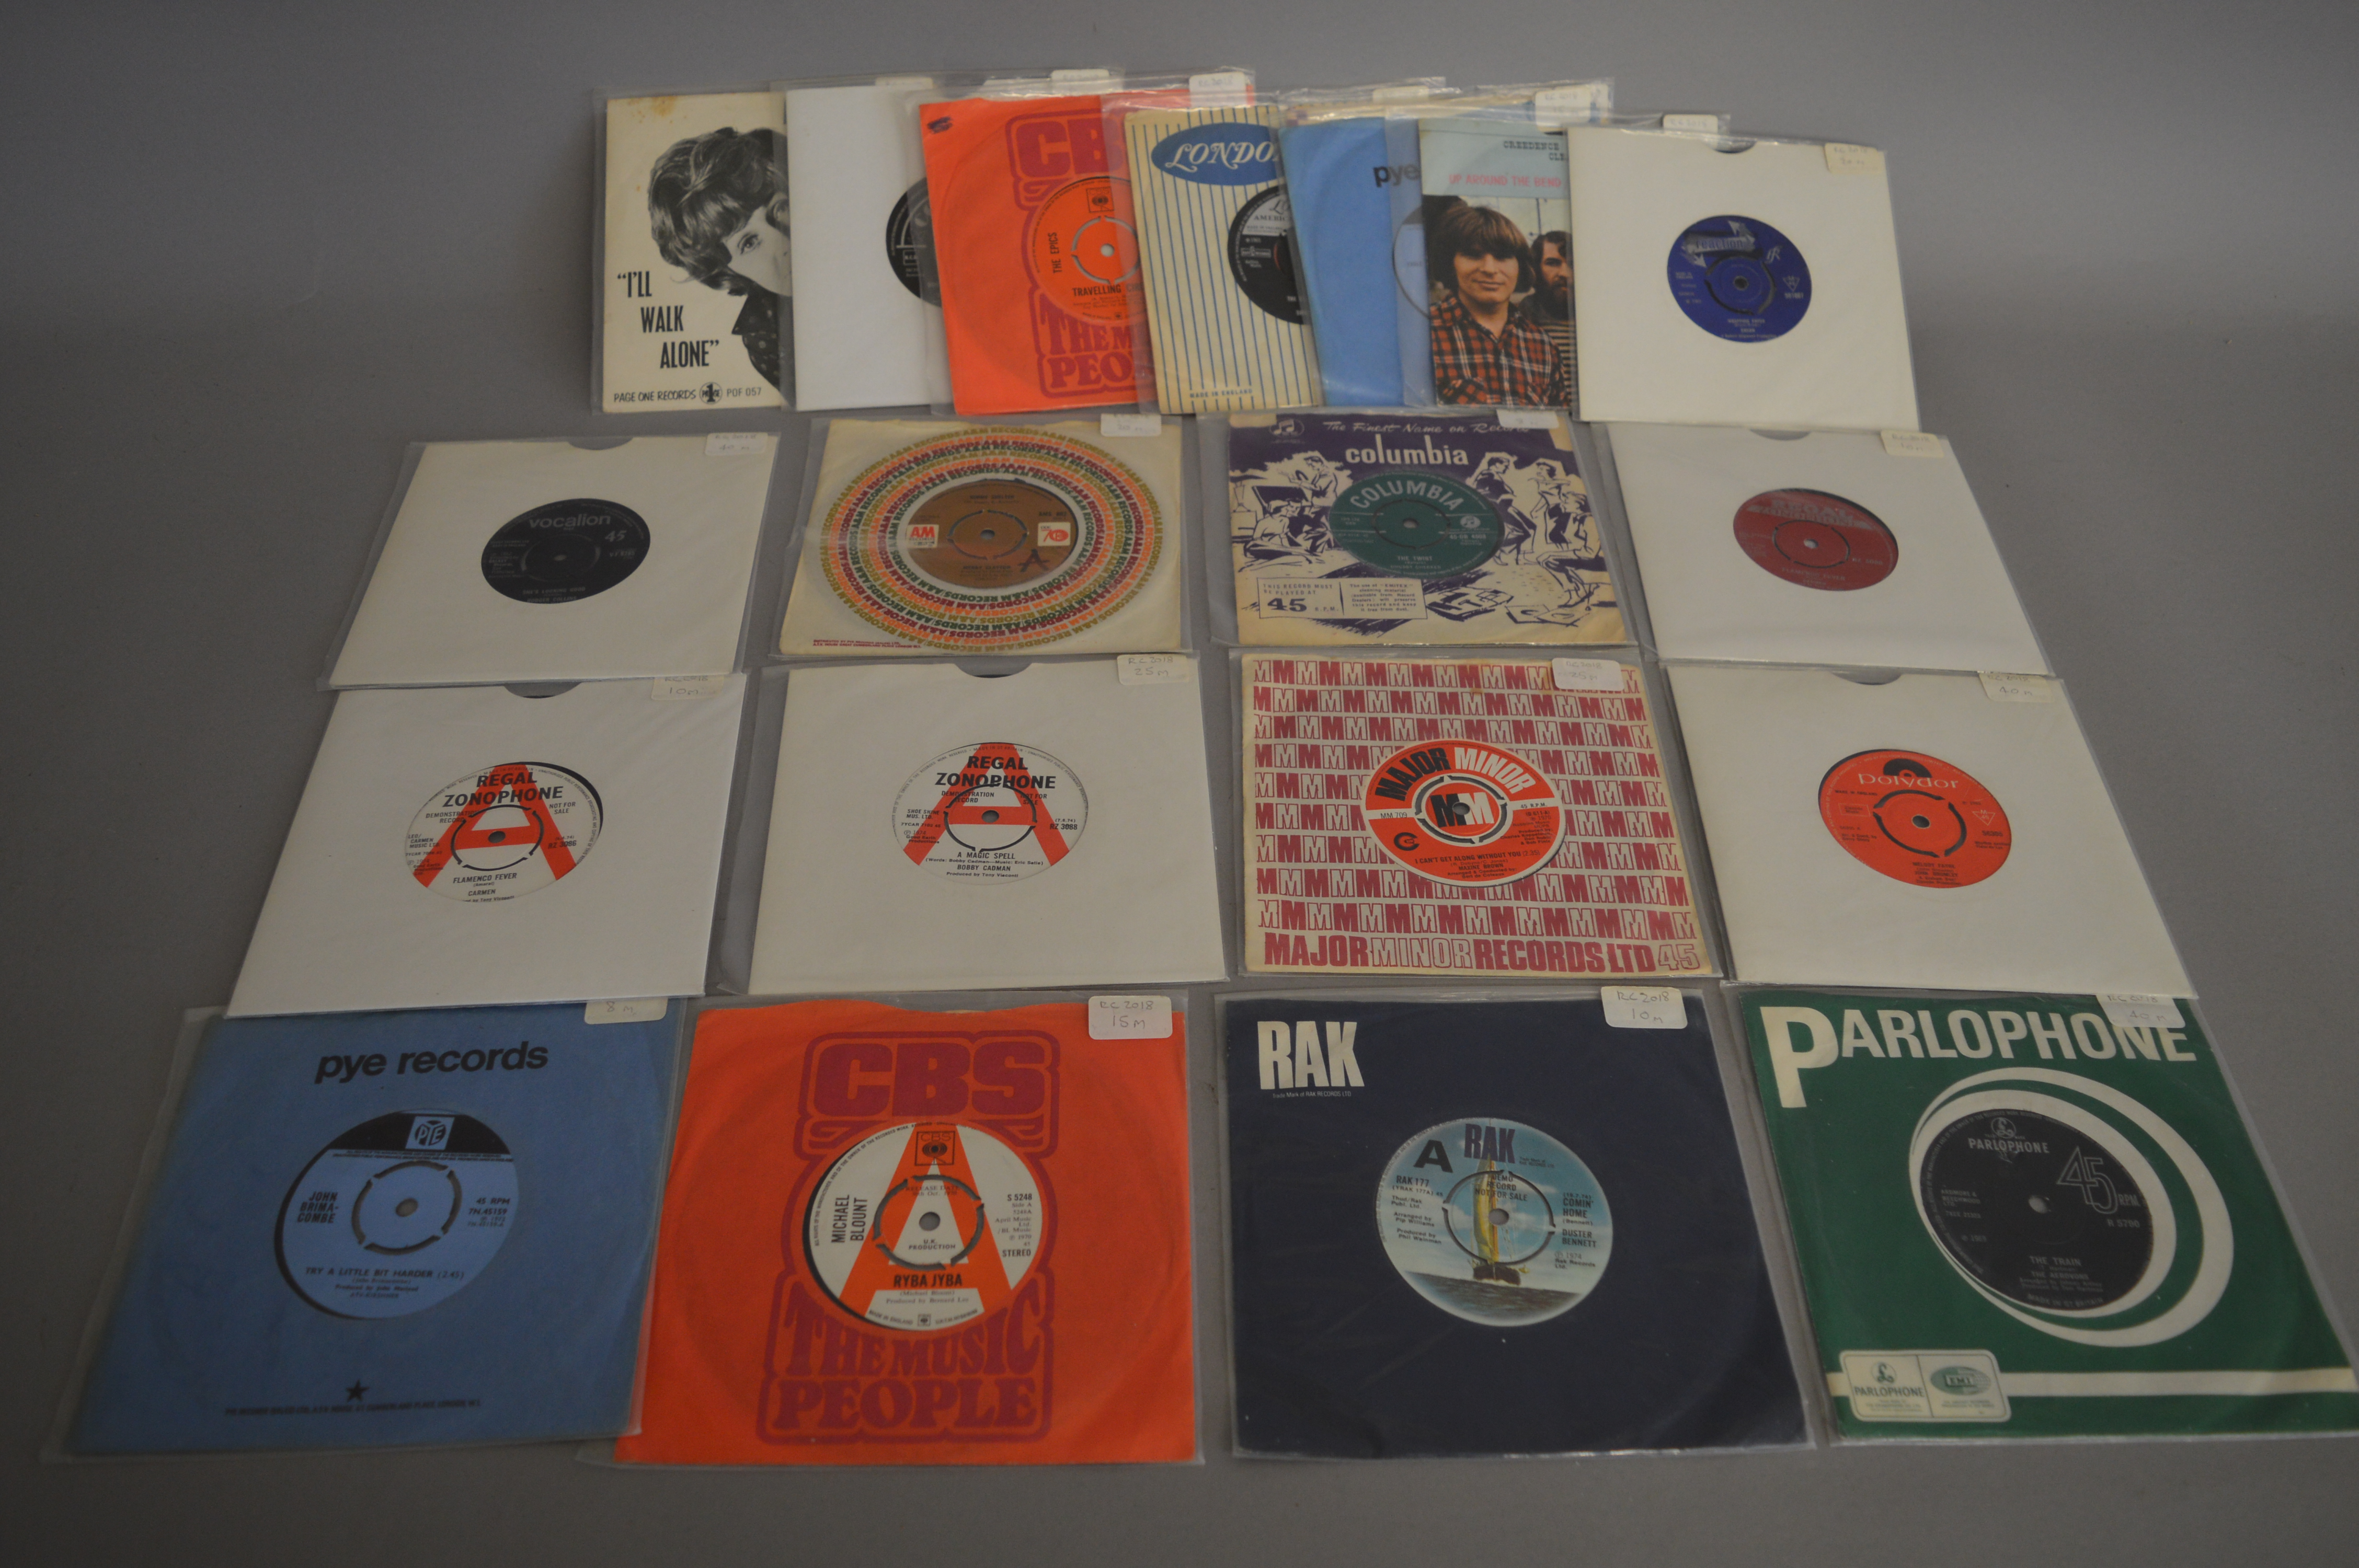 Collection of 20 rare 7 inch singles including demos mostly in original sleeves including John